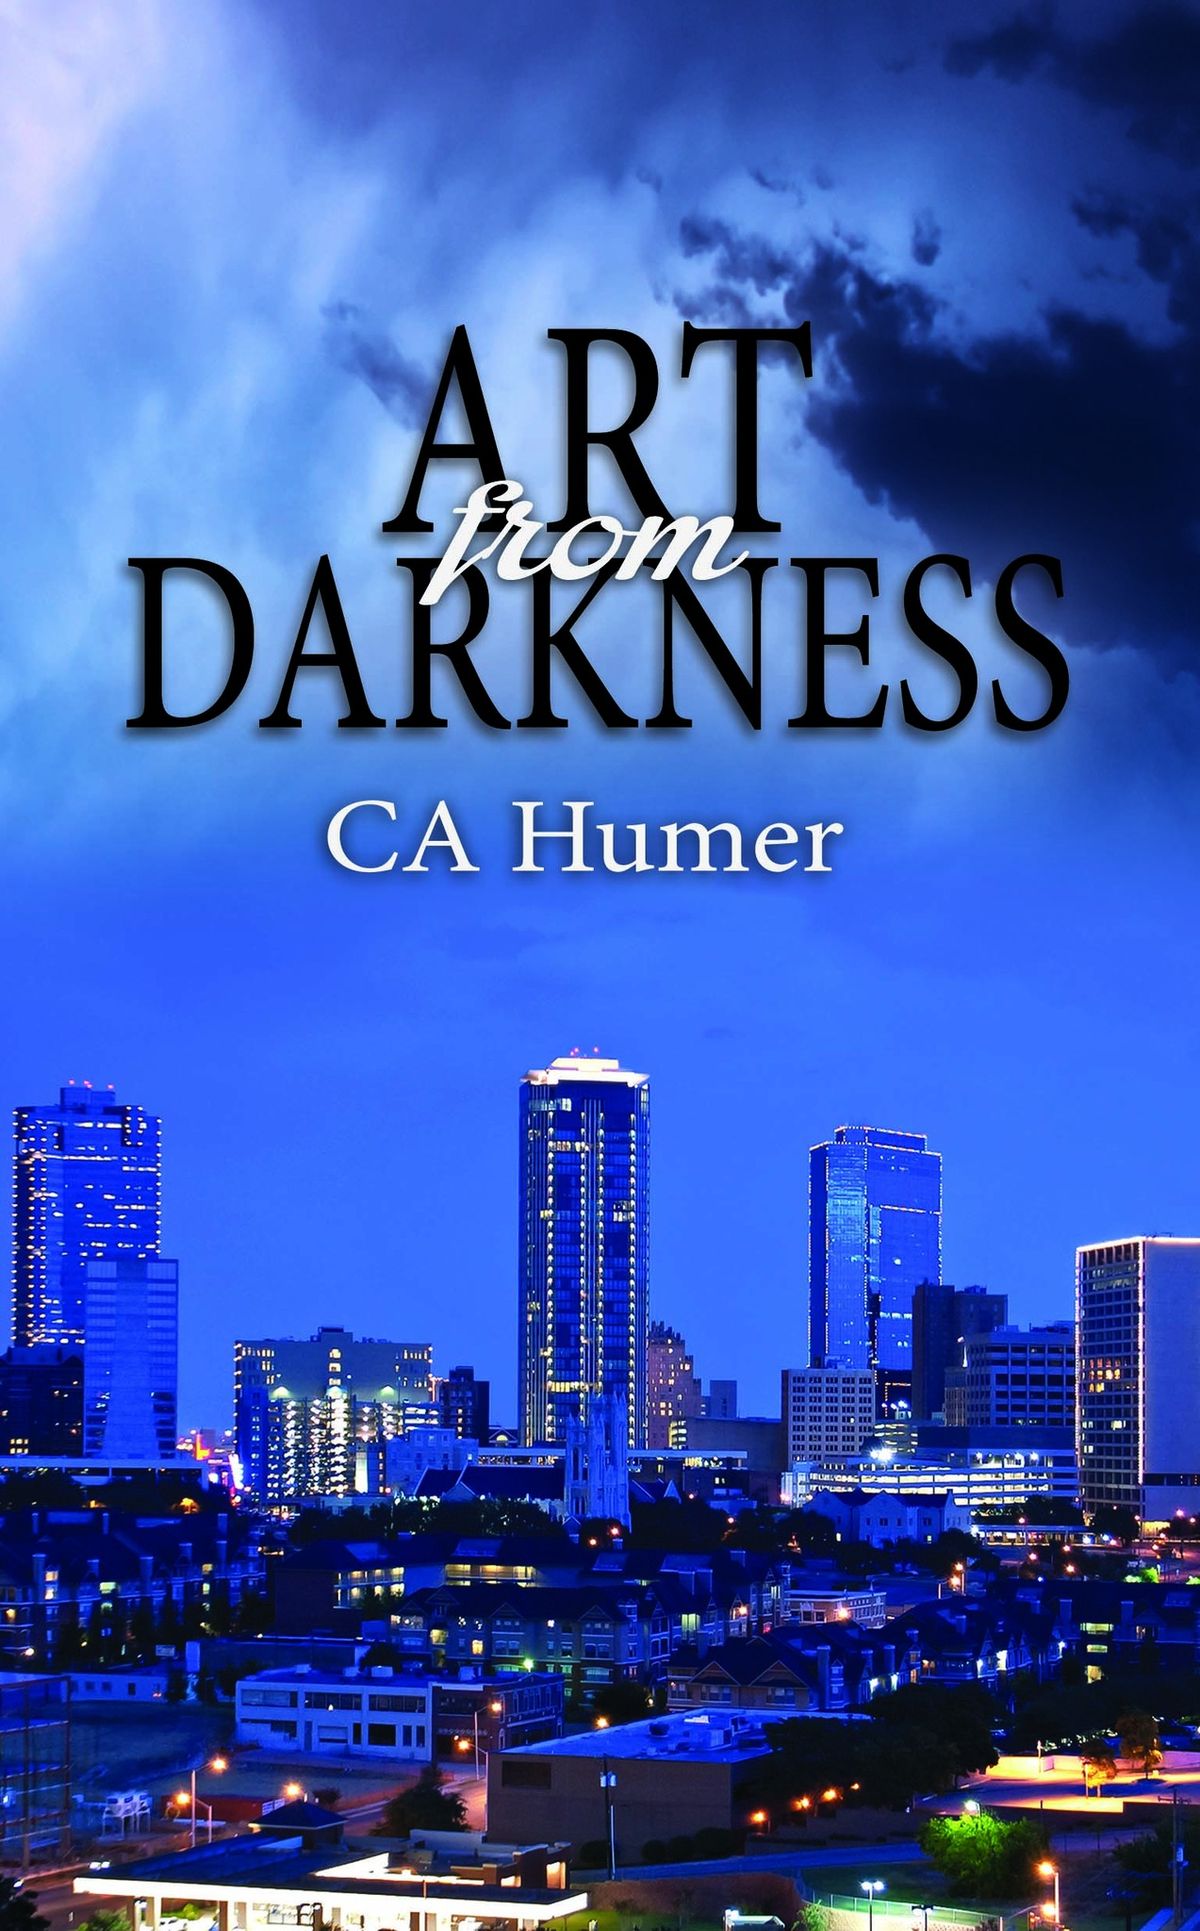 Art from Darkness book signing 